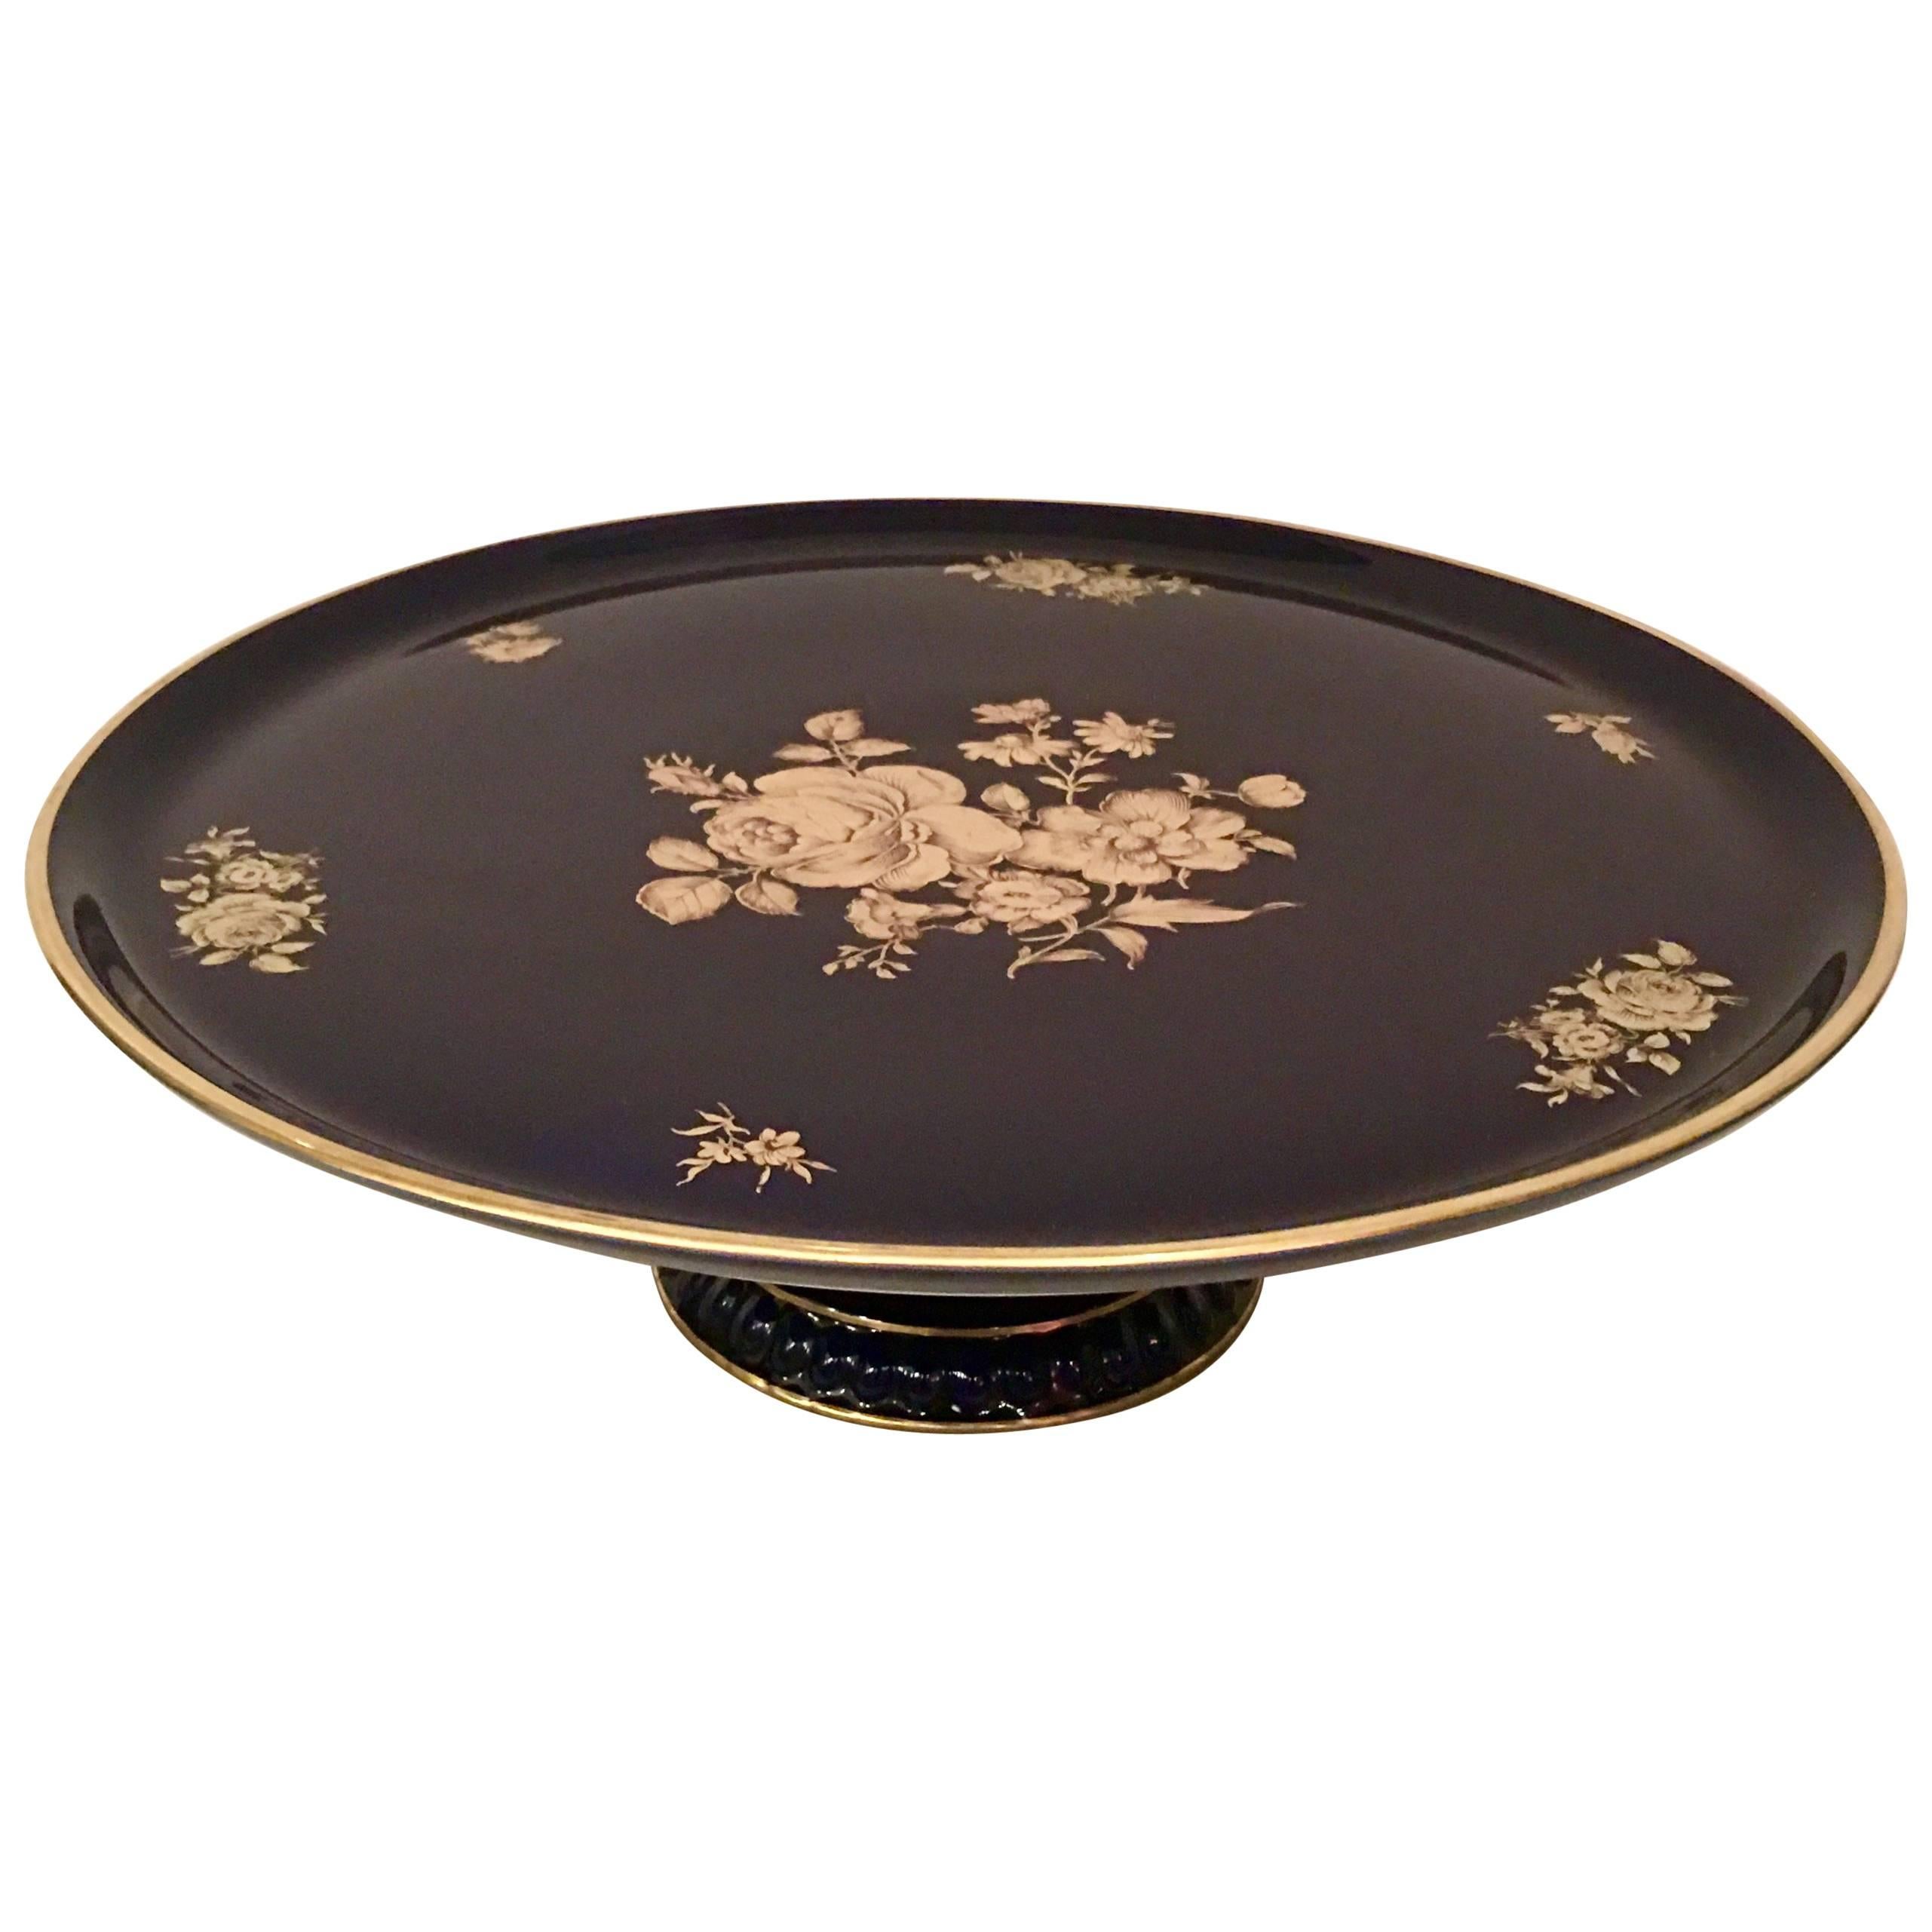 20th Century German Porcelain & 22-Karat Gold Footed Cake Platter By, Bareuther For Sale